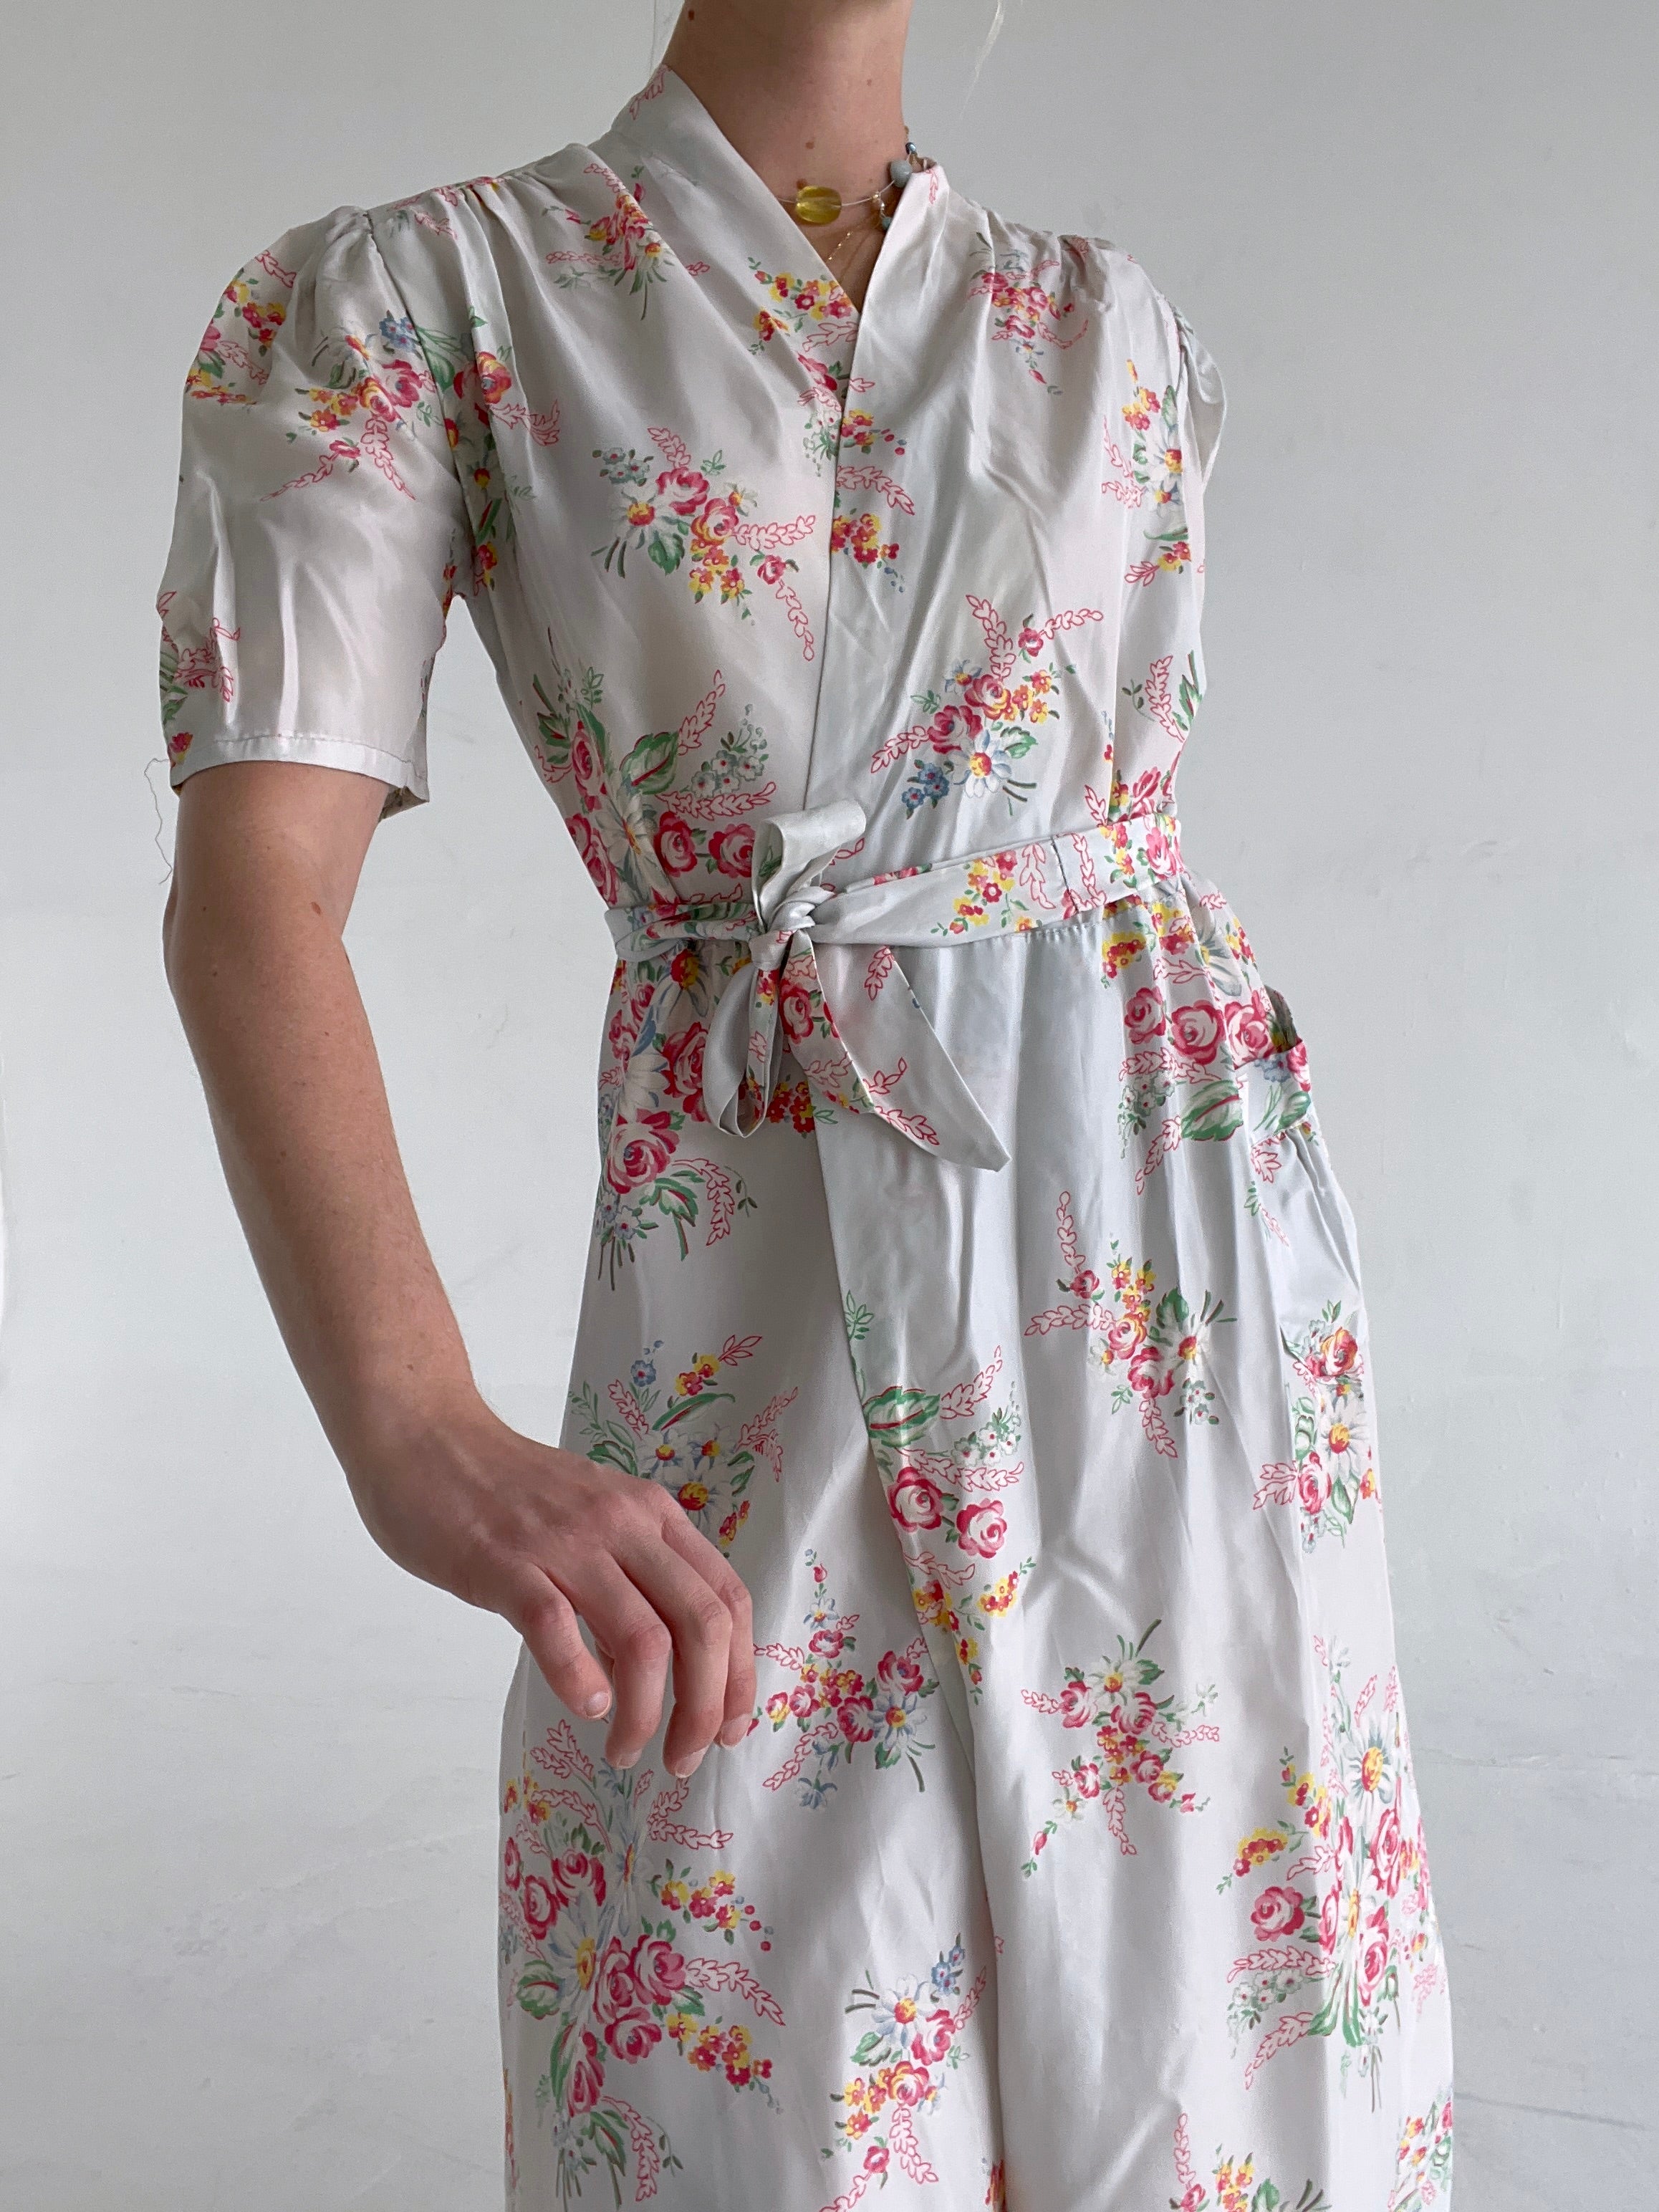 1930's Baby Blue Wrap Dress with Floral Print